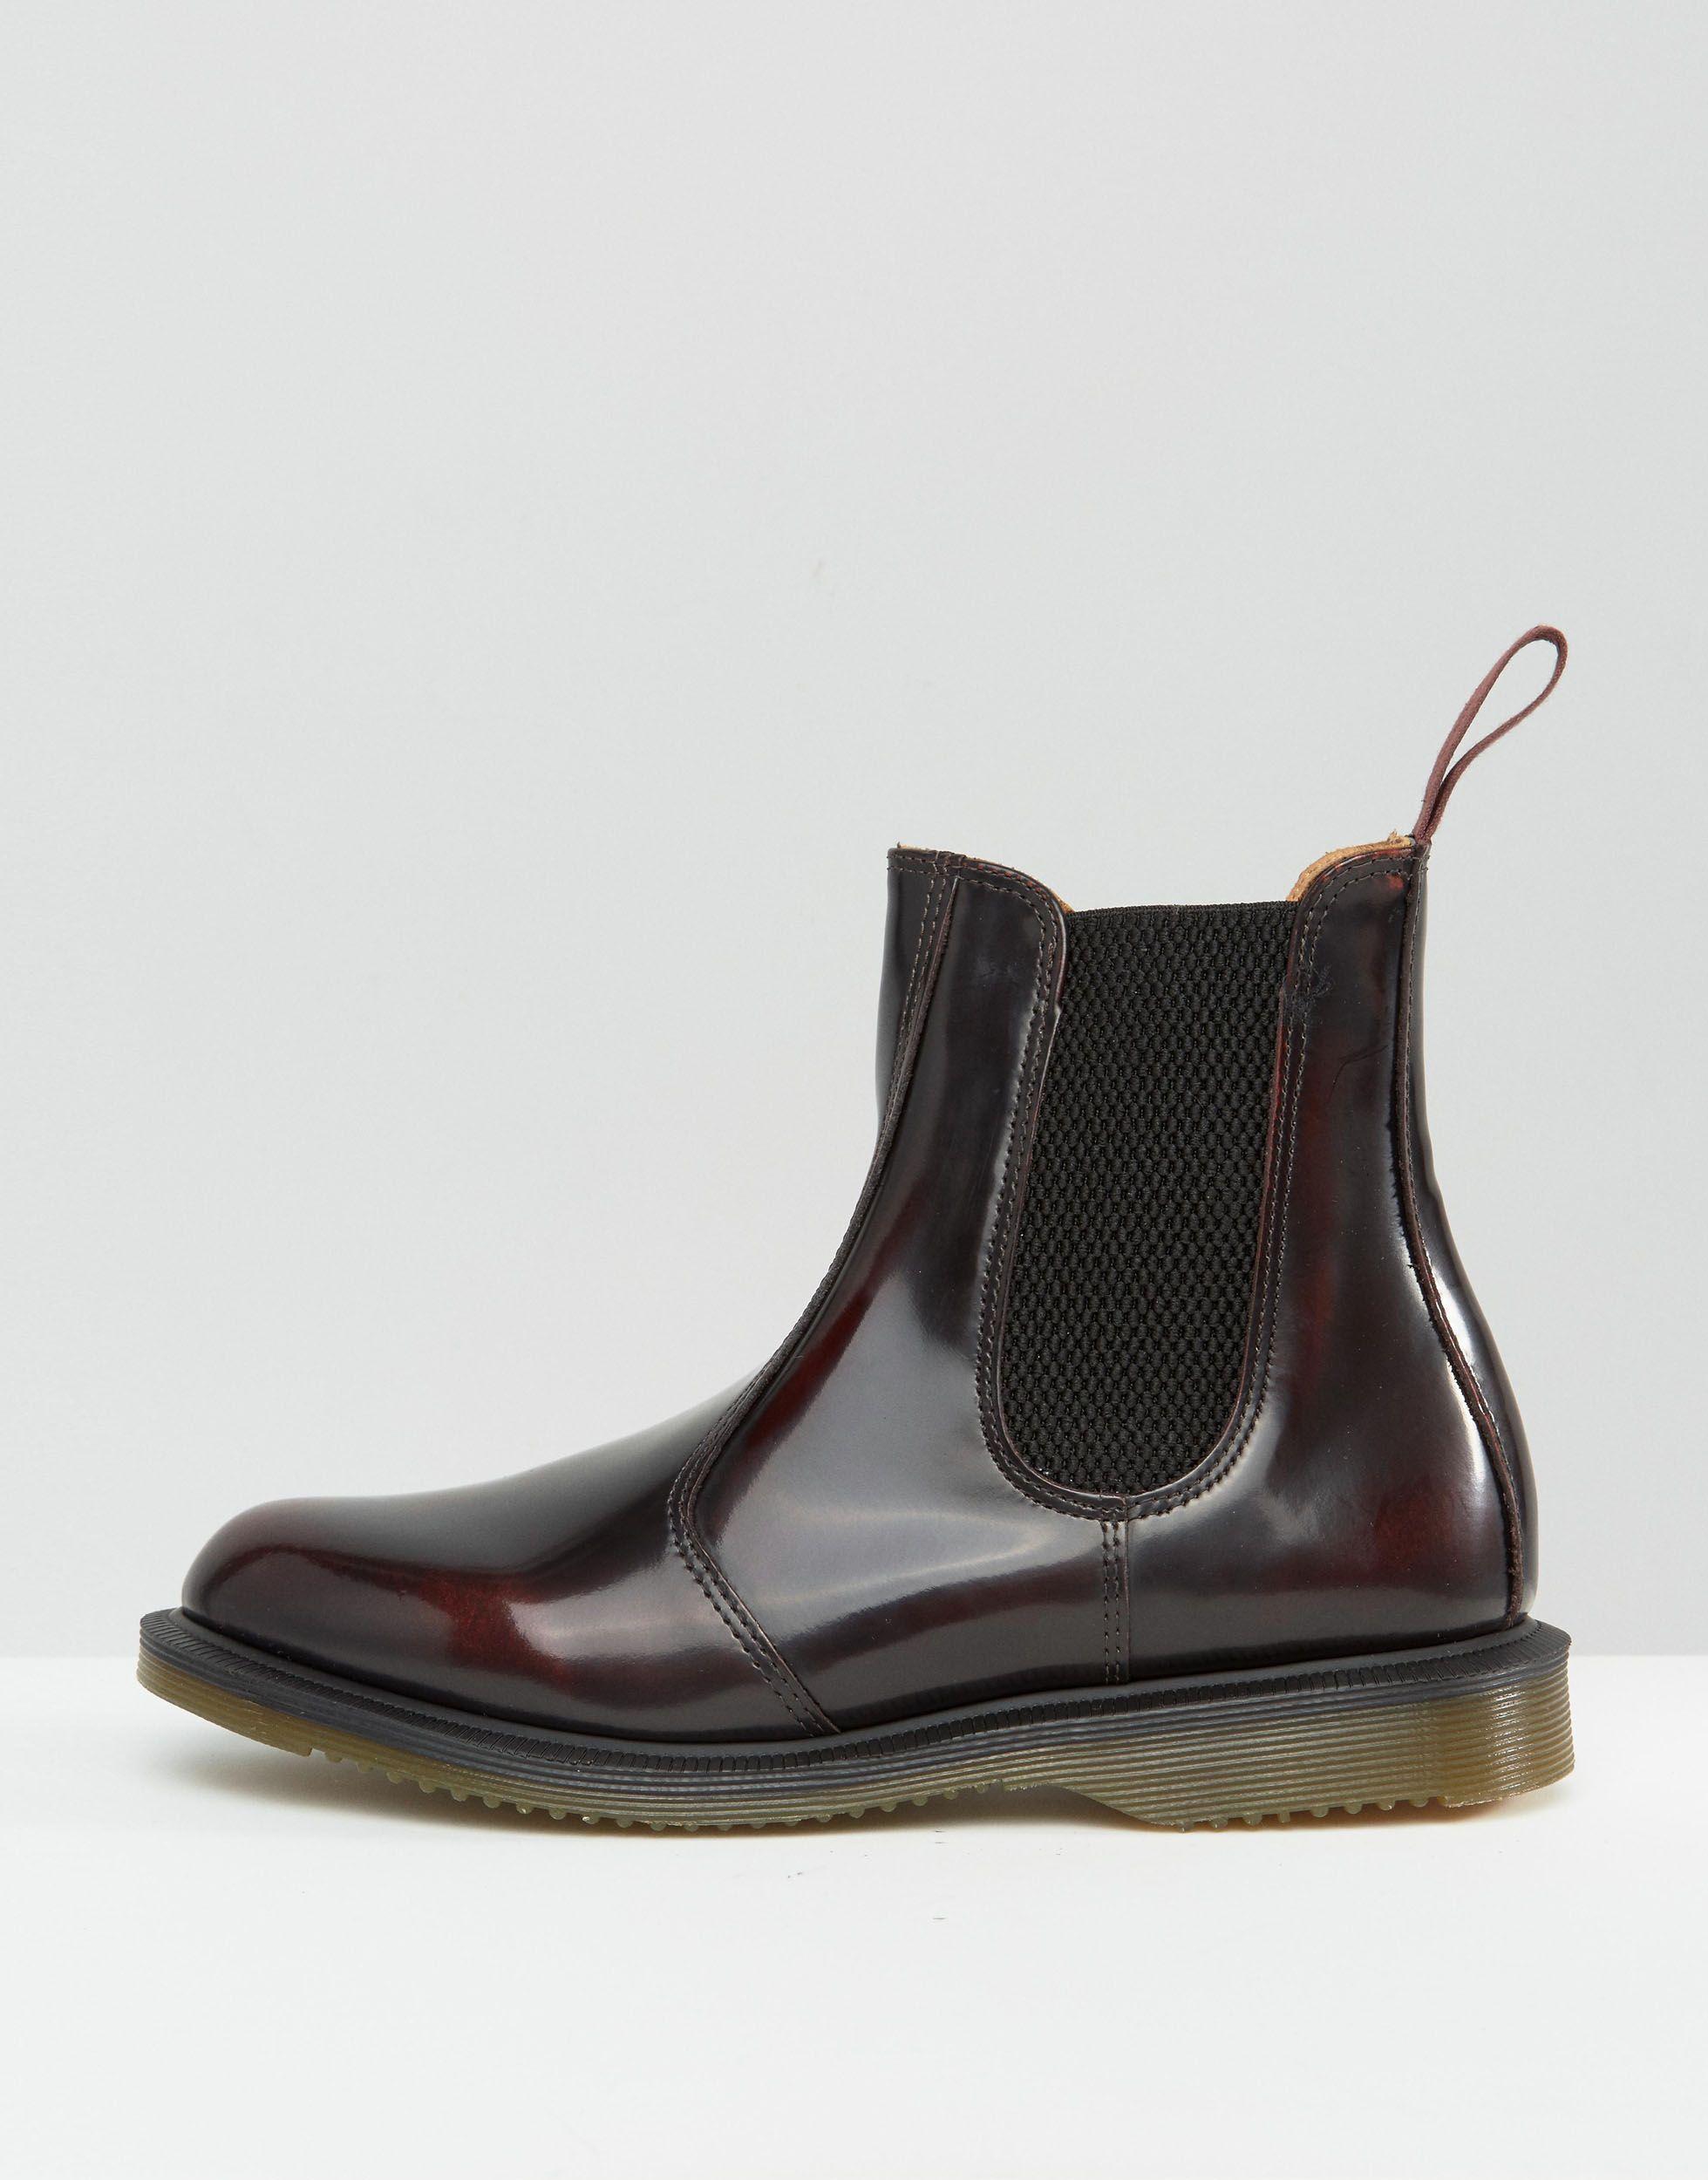 Dr. Martens Leather Kensington Flora Burgundy Chelsea Boots in Red | Lyst